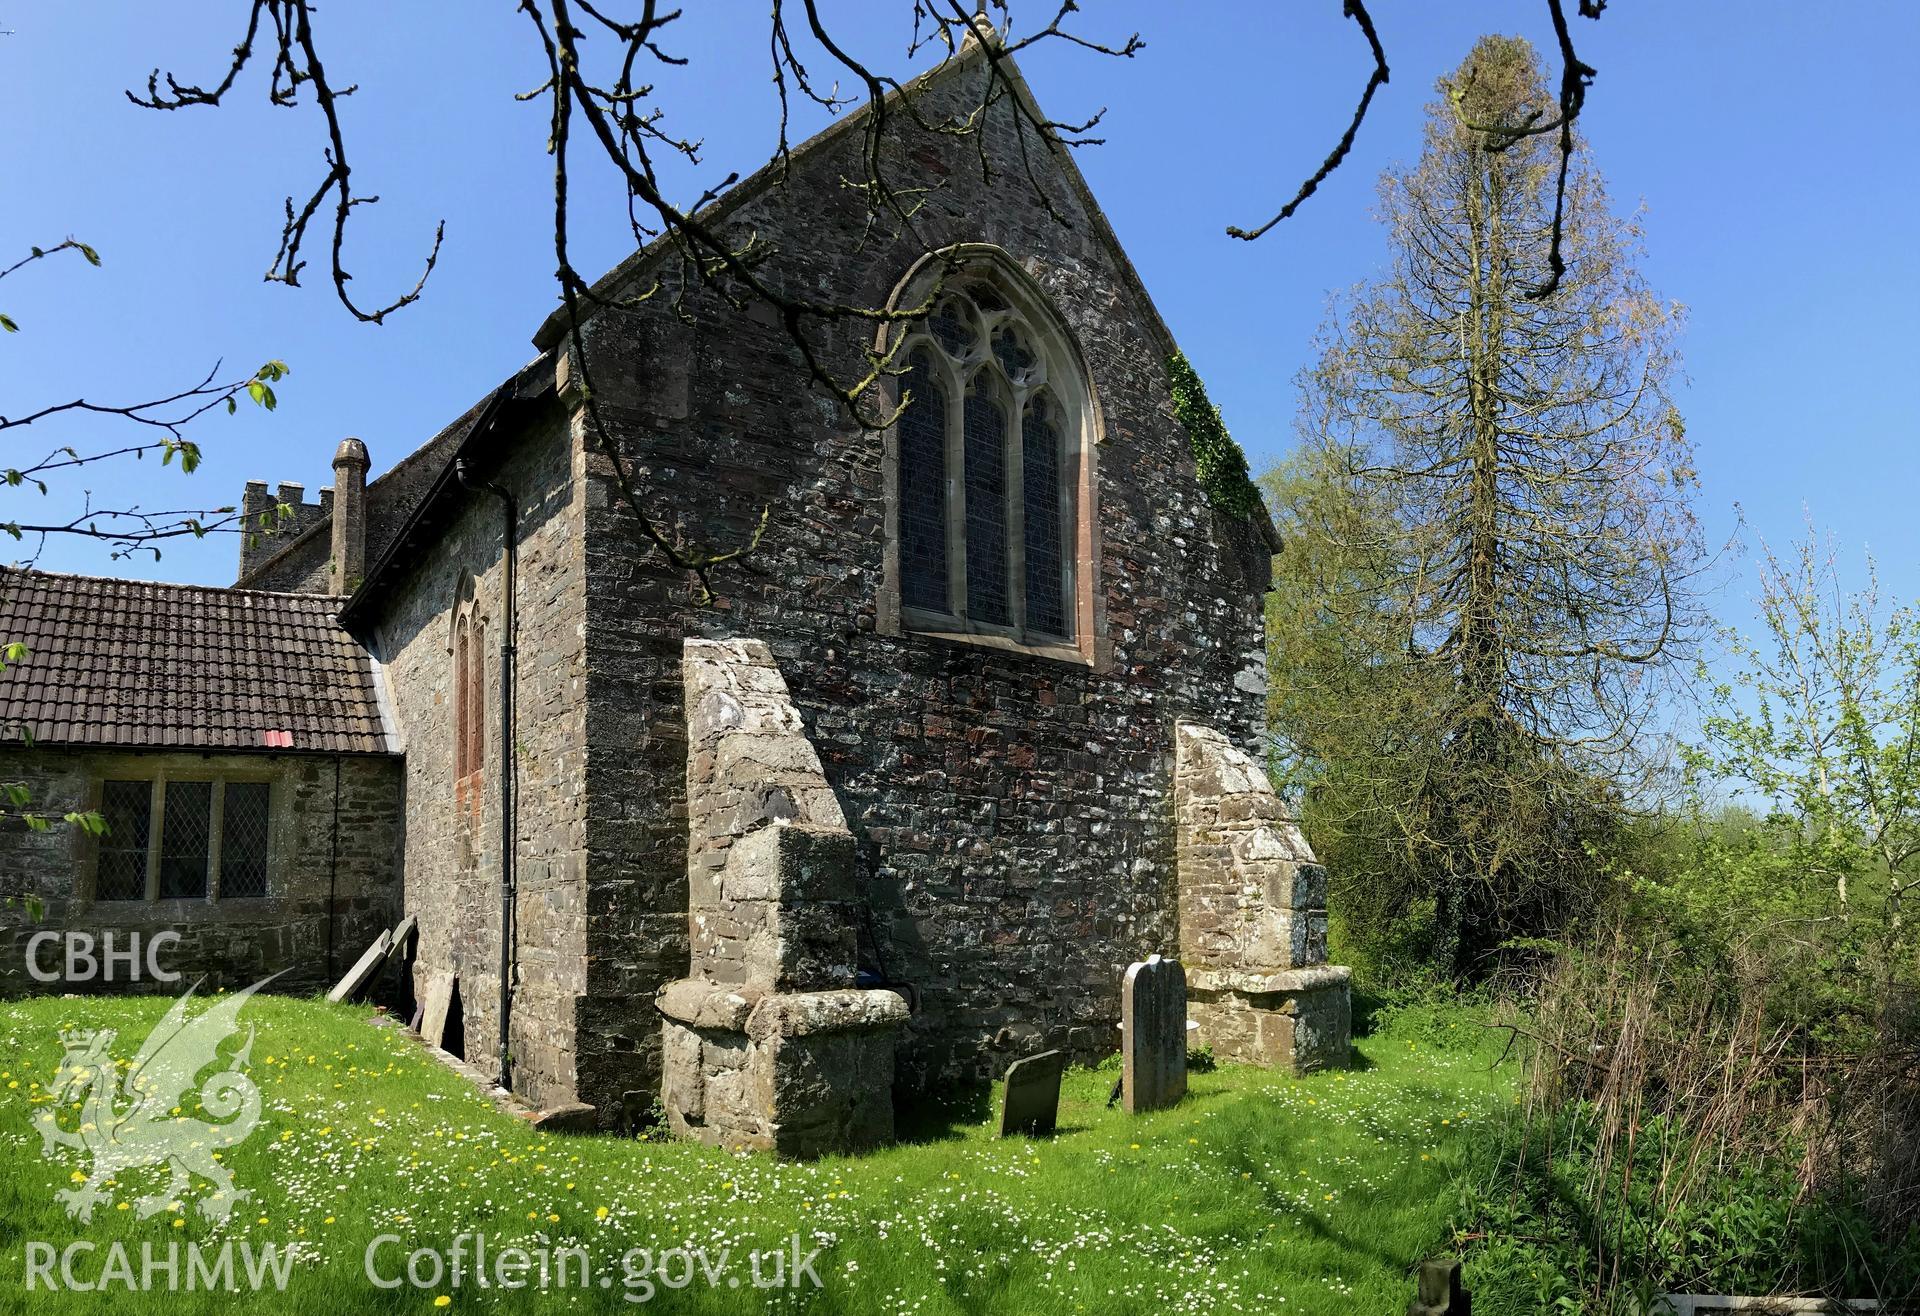 Colour photo showing exterior view of St. Mary Magdalene's or St. Clara's church at St. Clears, taken by Paul R. Davis, 6th May 2018.